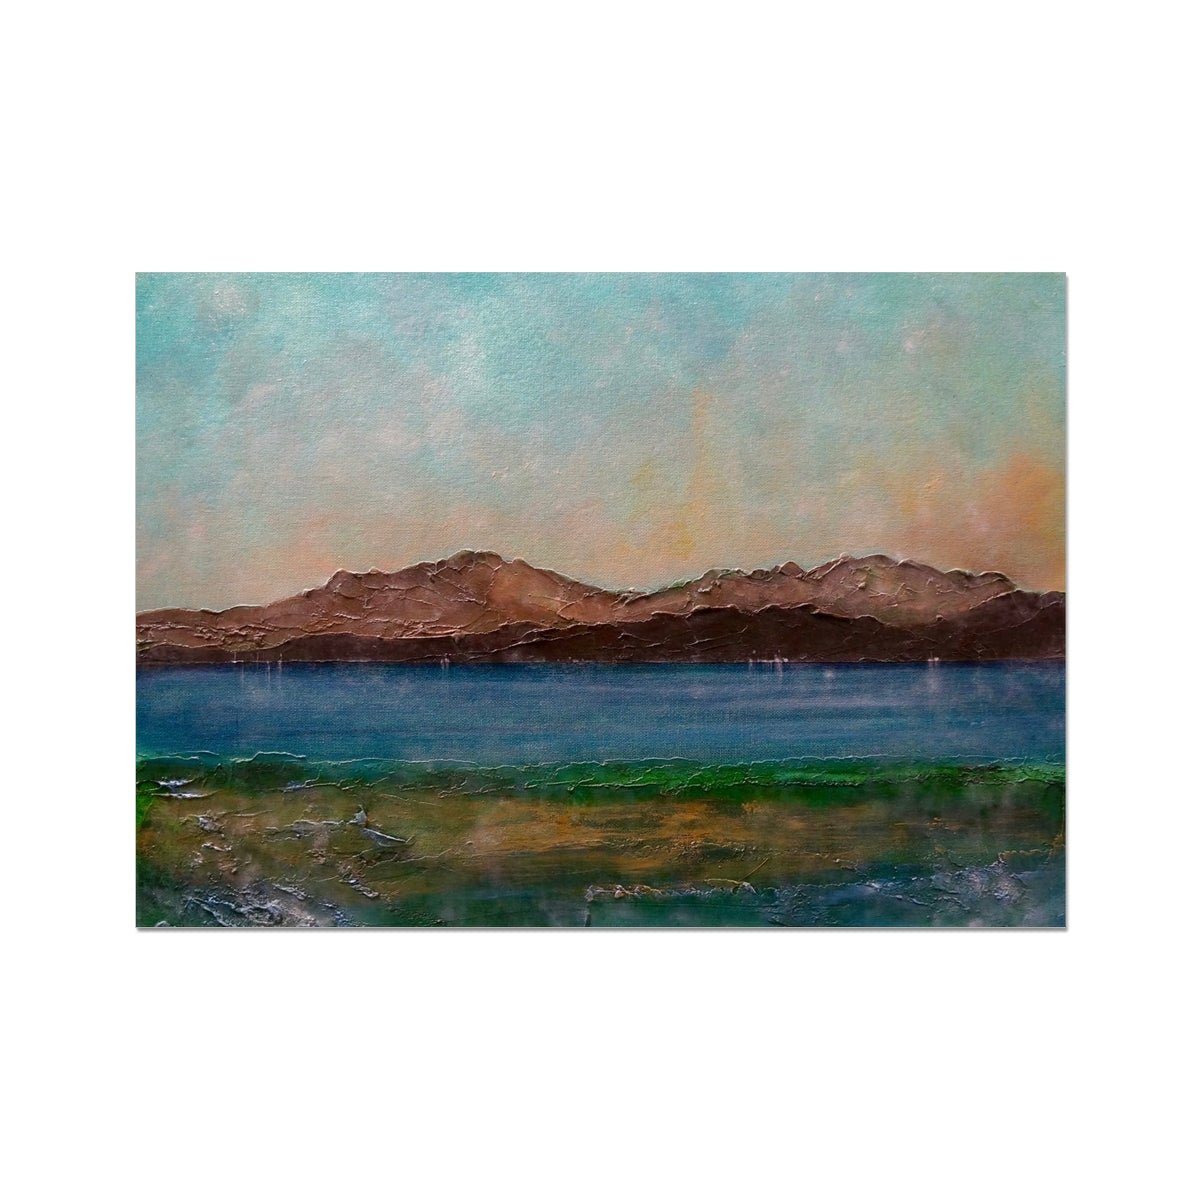 Arran From Scalpsie Bay Painting | Fine Art Prints From Scotland-Unframed Prints-Arran Art Gallery-A2 Landscape-Paintings, Prints, Homeware, Art Gifts From Scotland By Scottish Artist Kevin Hunter